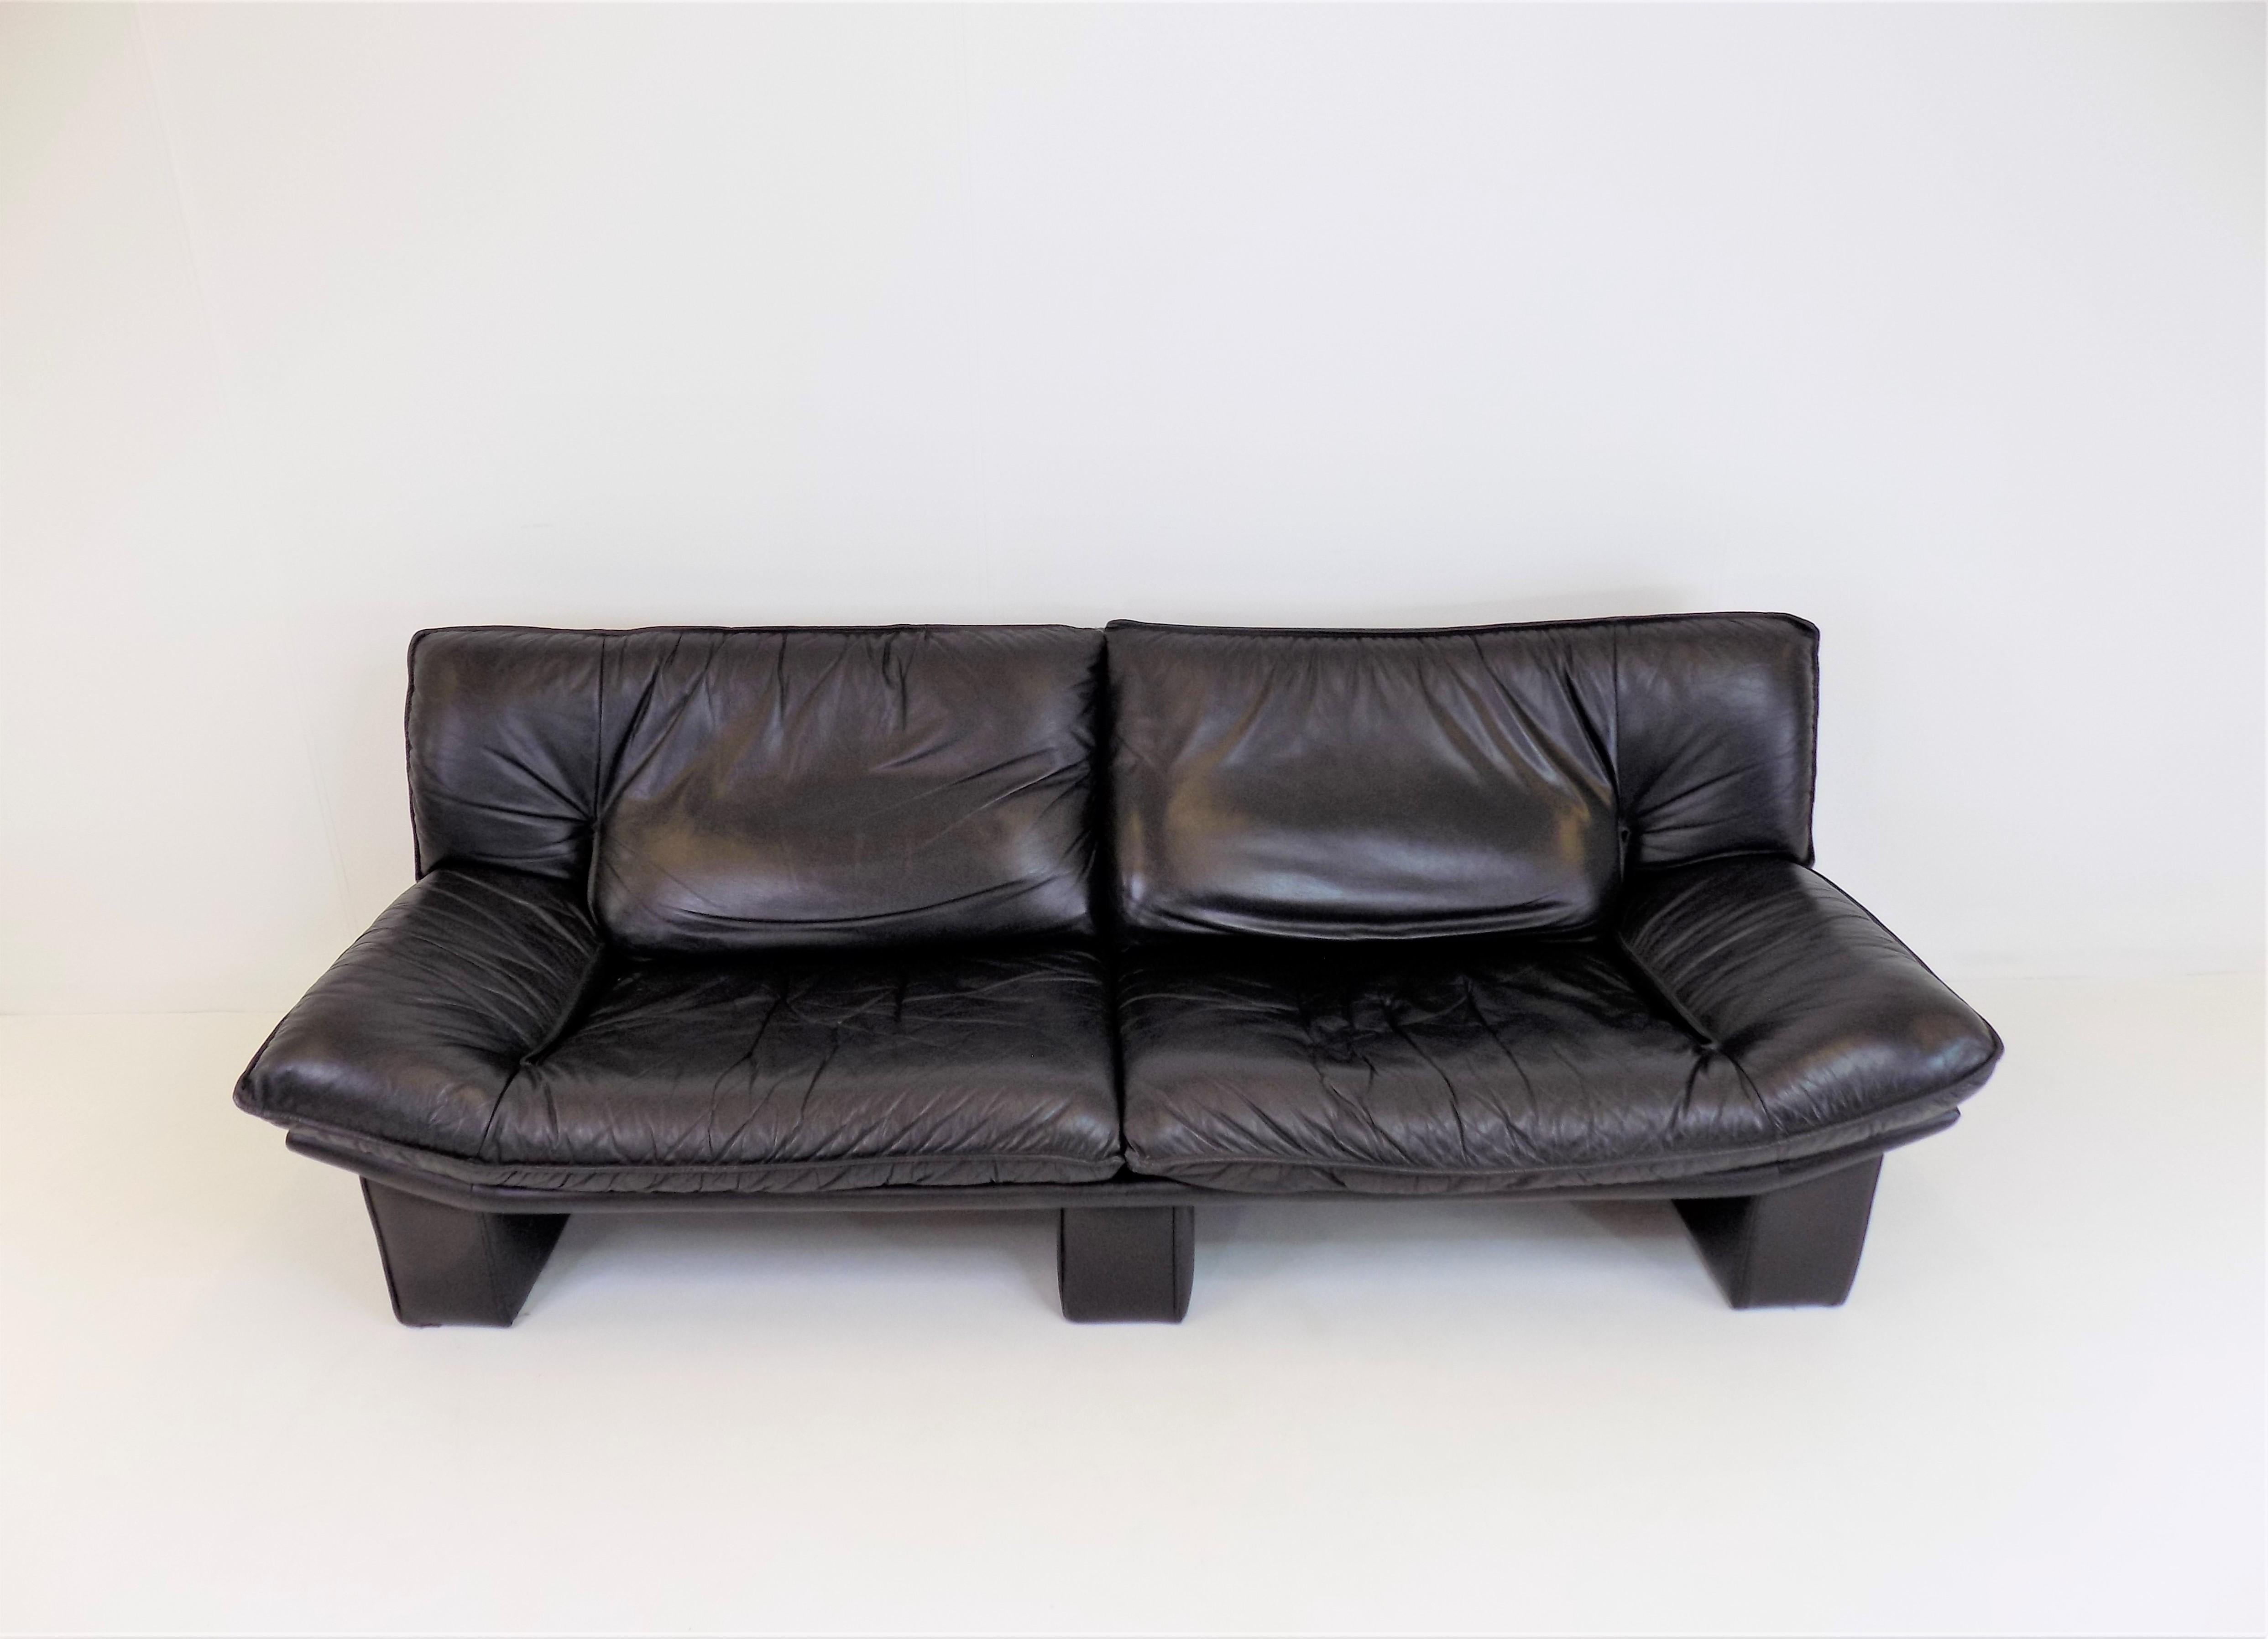 An Ambassador 3 seater black leather sofa in excellent condition. The sofa has soft leather which is in very good condition. The massive, also leather,  L pillars of the sofa are undamaged.

 

The sofa was designed by the Italian manufacturer